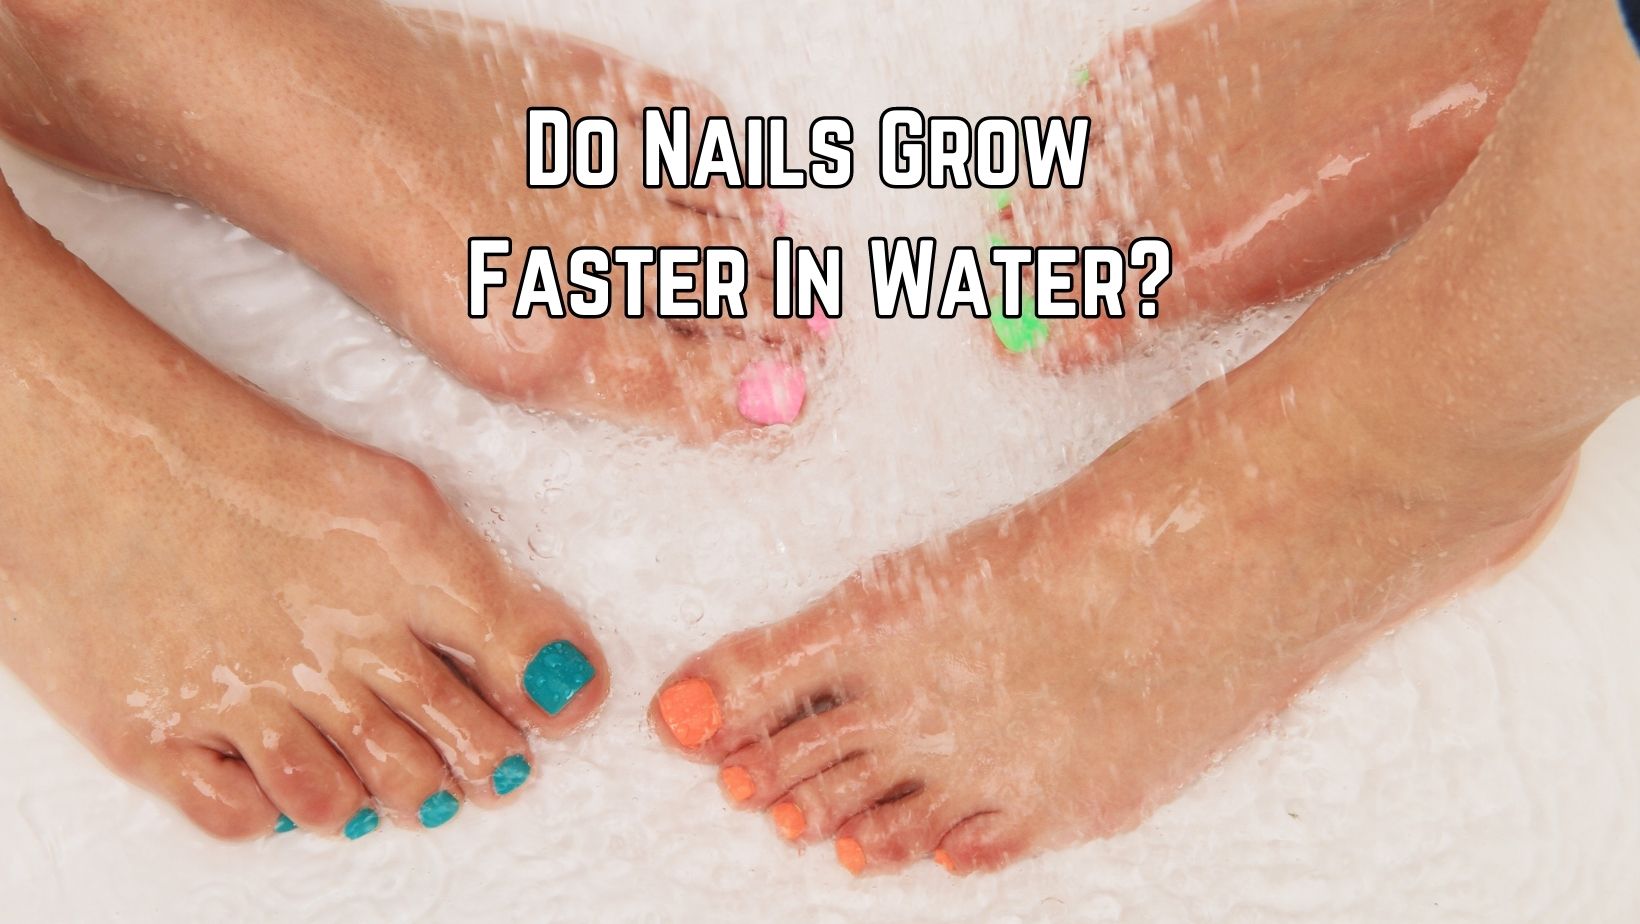 Do Nails Grow Faster In Water?